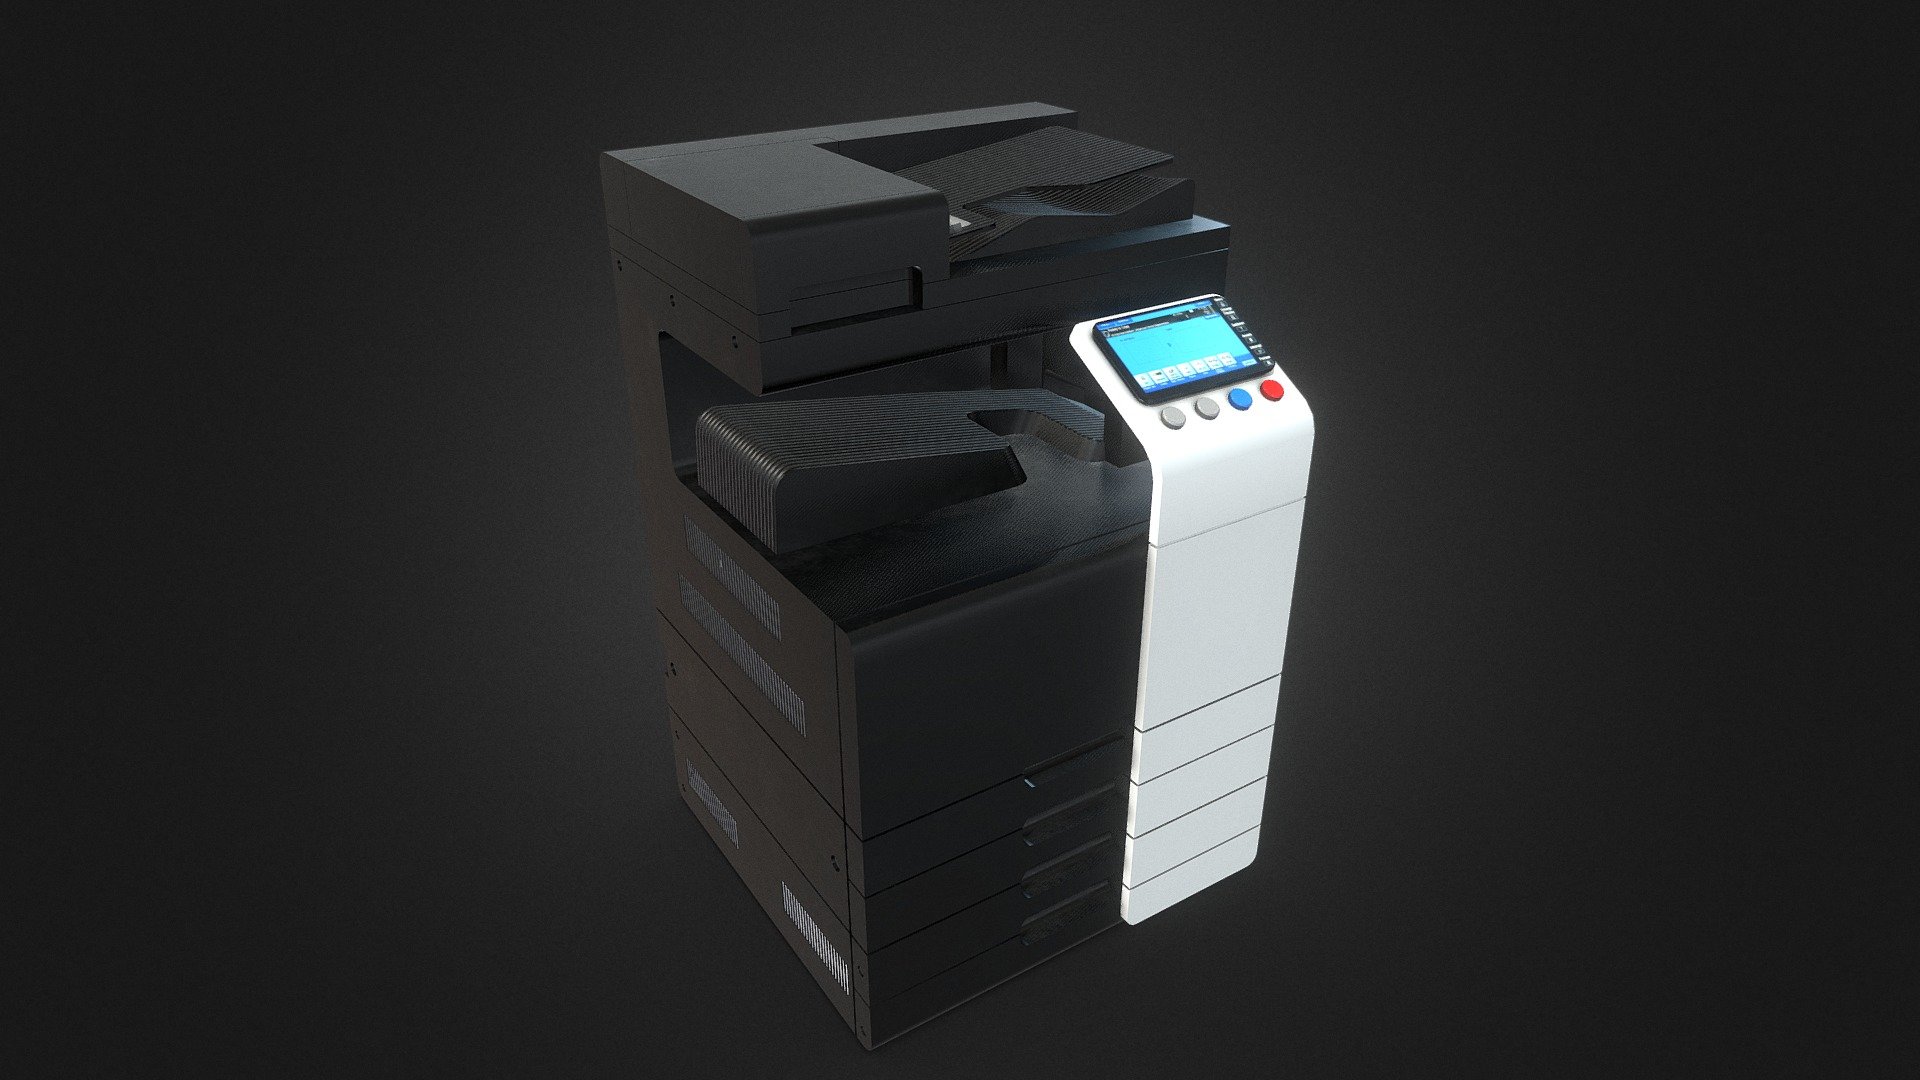 Office printer - I've used big custom buttons with intent to be used in VR aplication for easier usage - model created in Blender 3D- painted in Substance Painter

Model prepared for OctopusVR 3d model